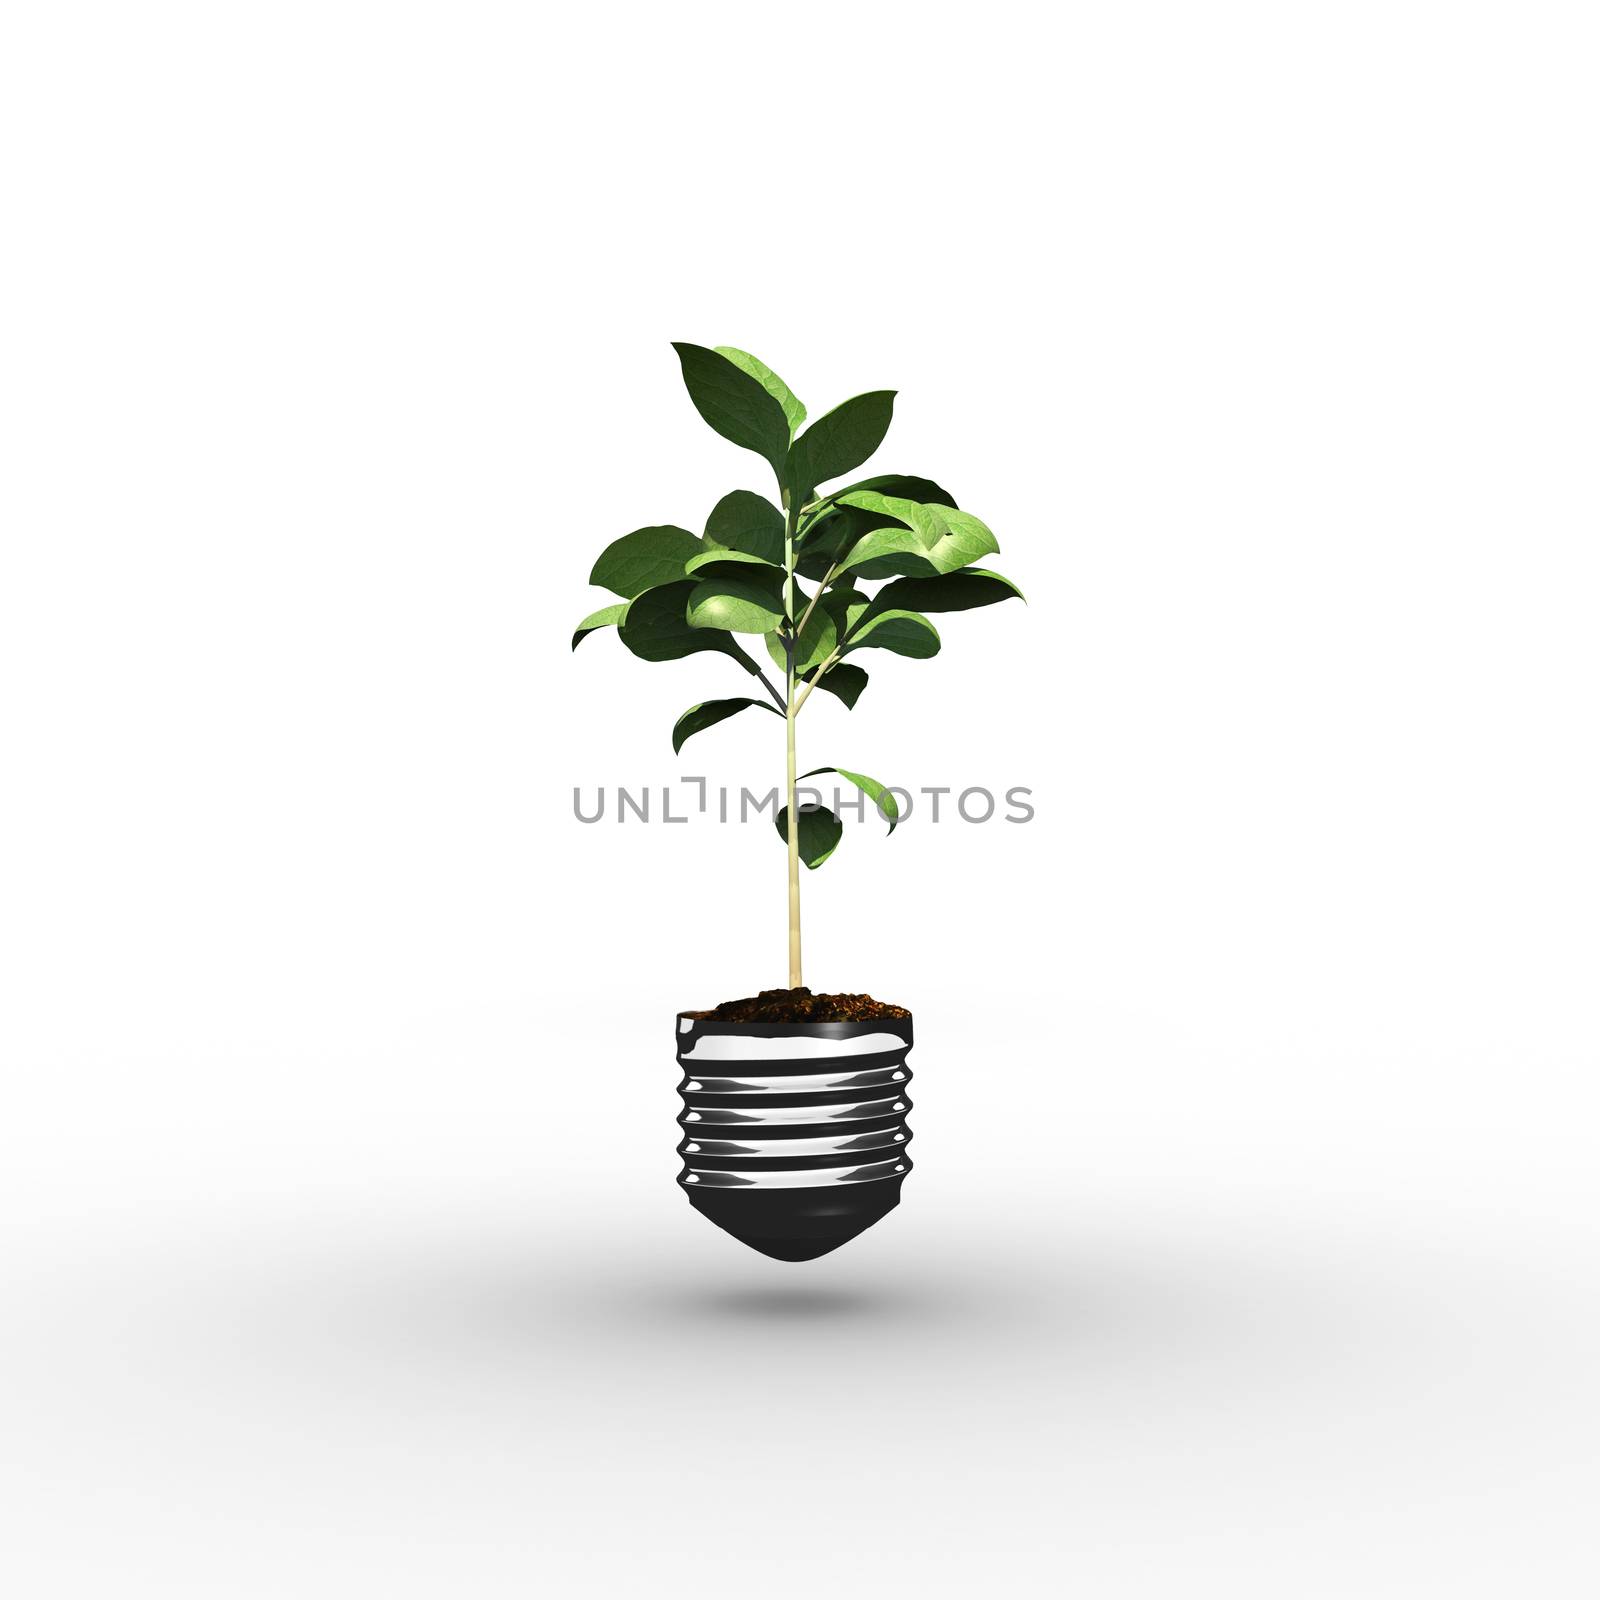 Empty light bulb against little green seedling with leaves growing